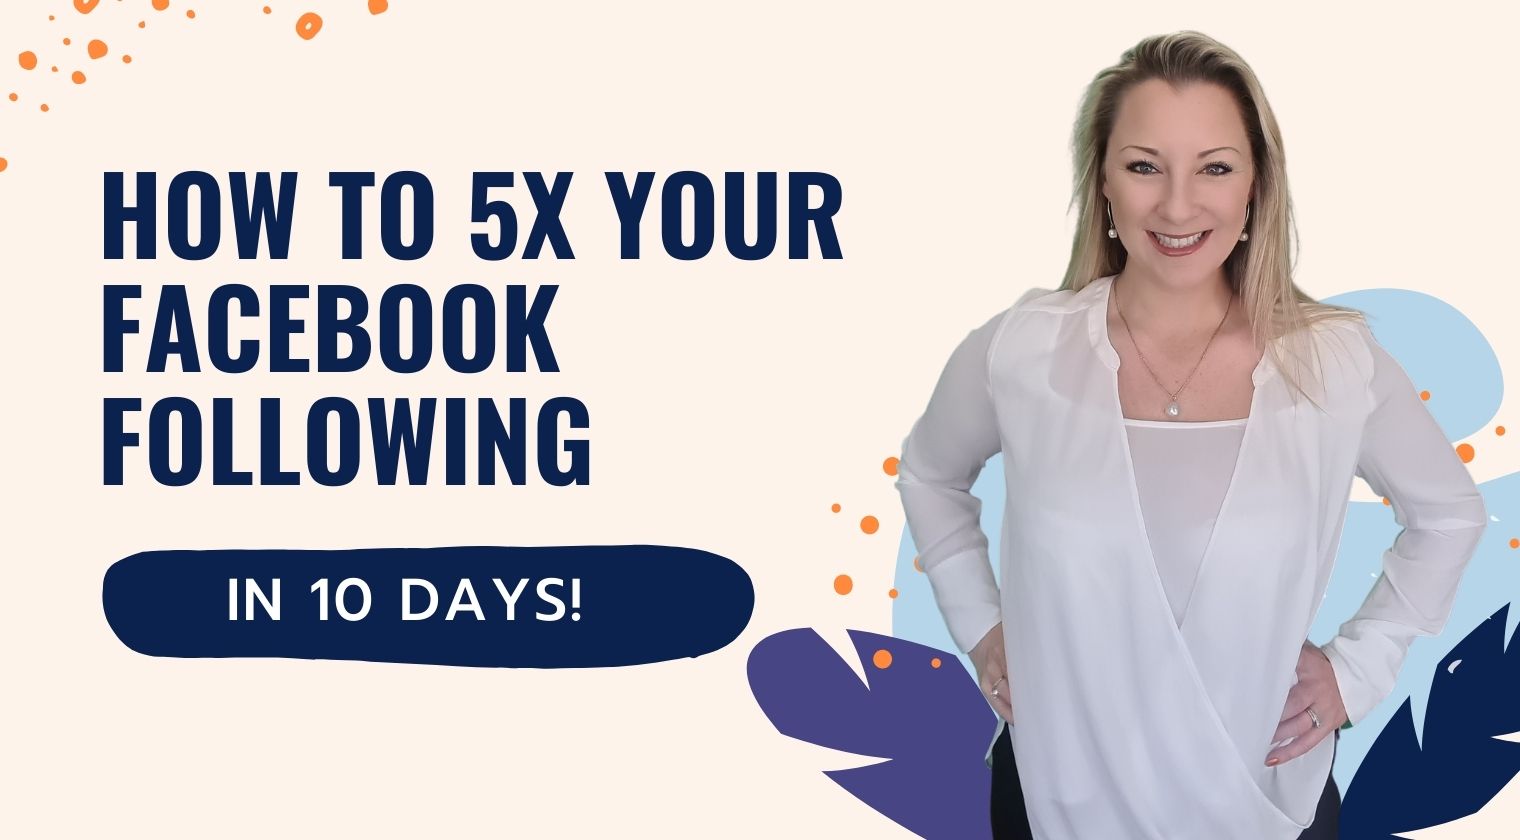 Copy of HOW TO 5 X FACEBOOK FOLLOWING (1520 x 840 px)